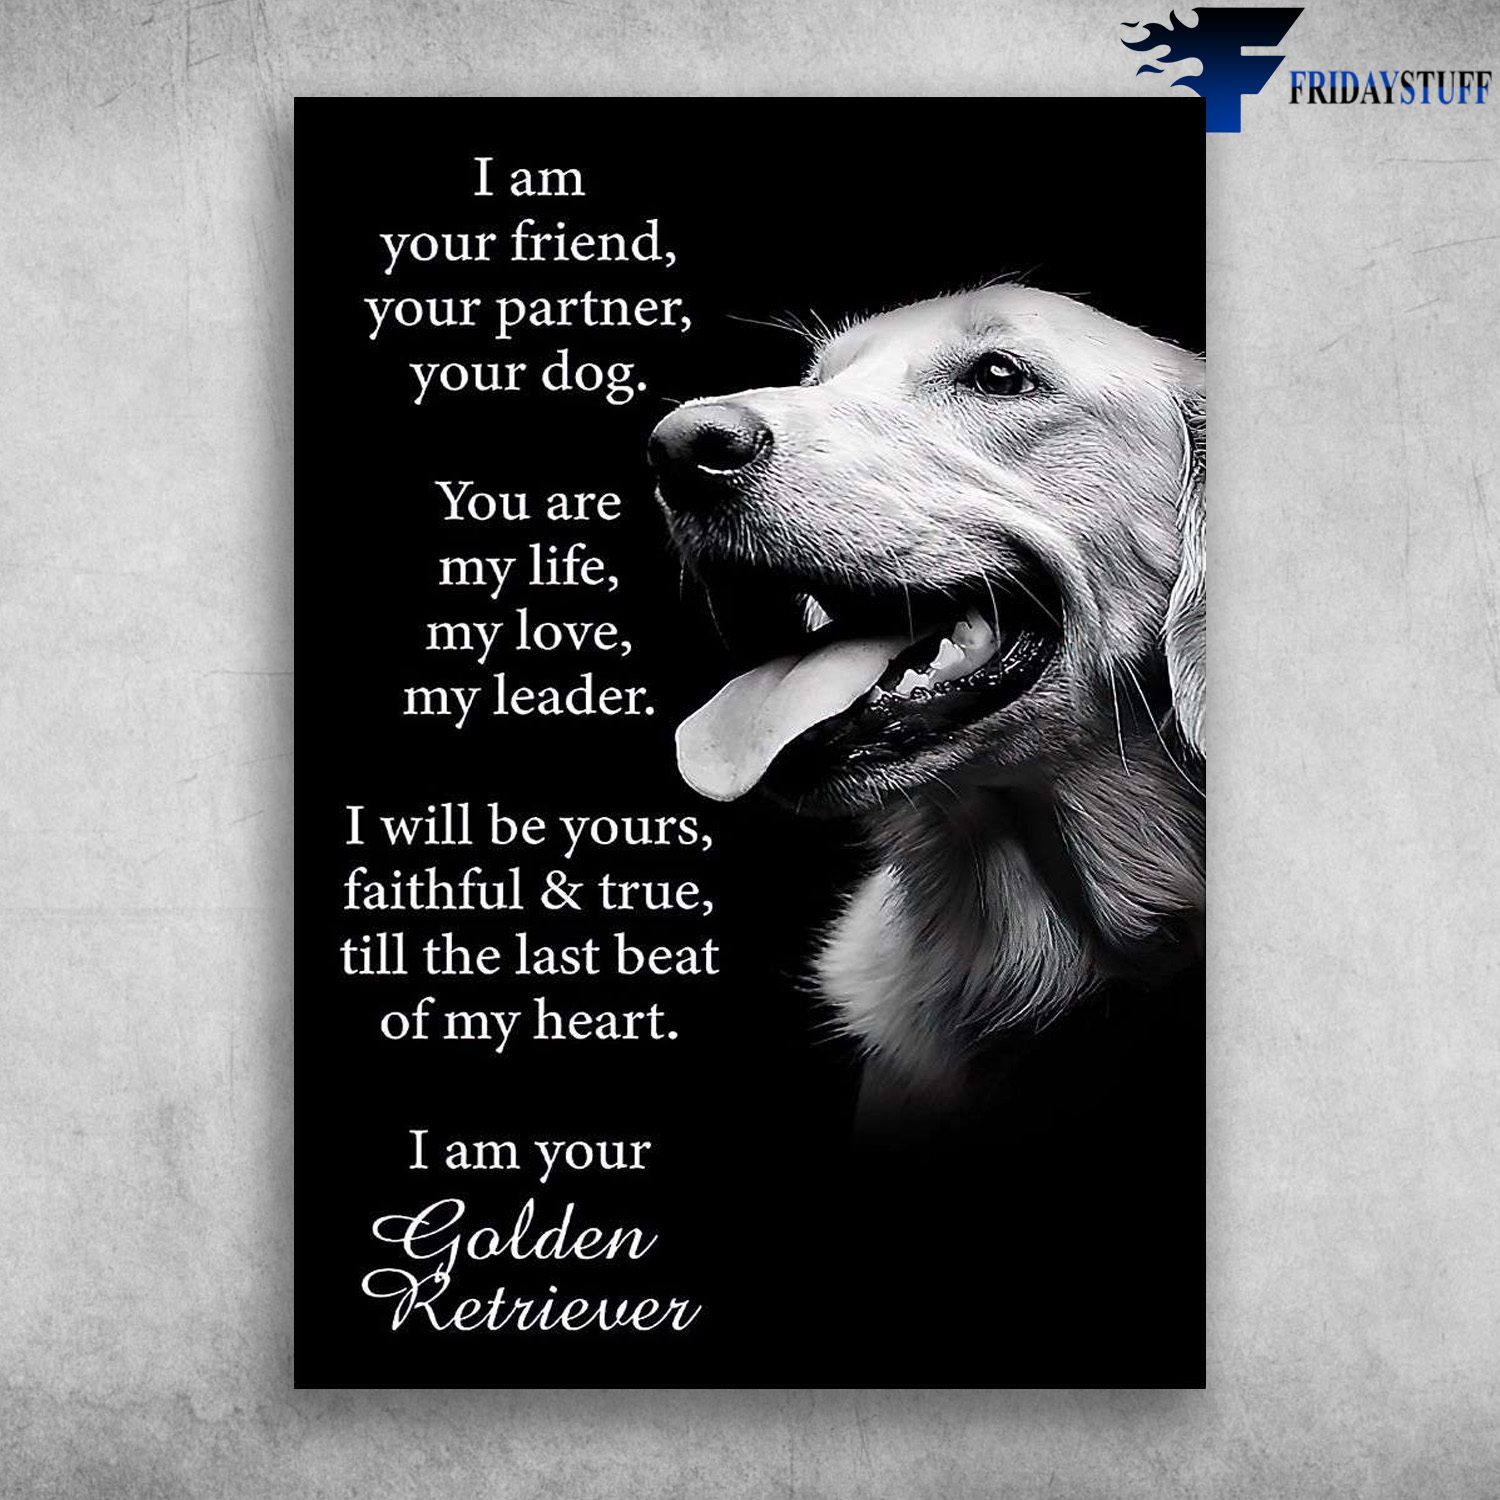 Golden Retriever - I Am Your Friend, Your Partner, Your Dog, You Are My Life, My Love, My Leader, I Will Be Yours, Faithful And True, Till The Last Beat Of My Heart, I Am Your Golden Retriever